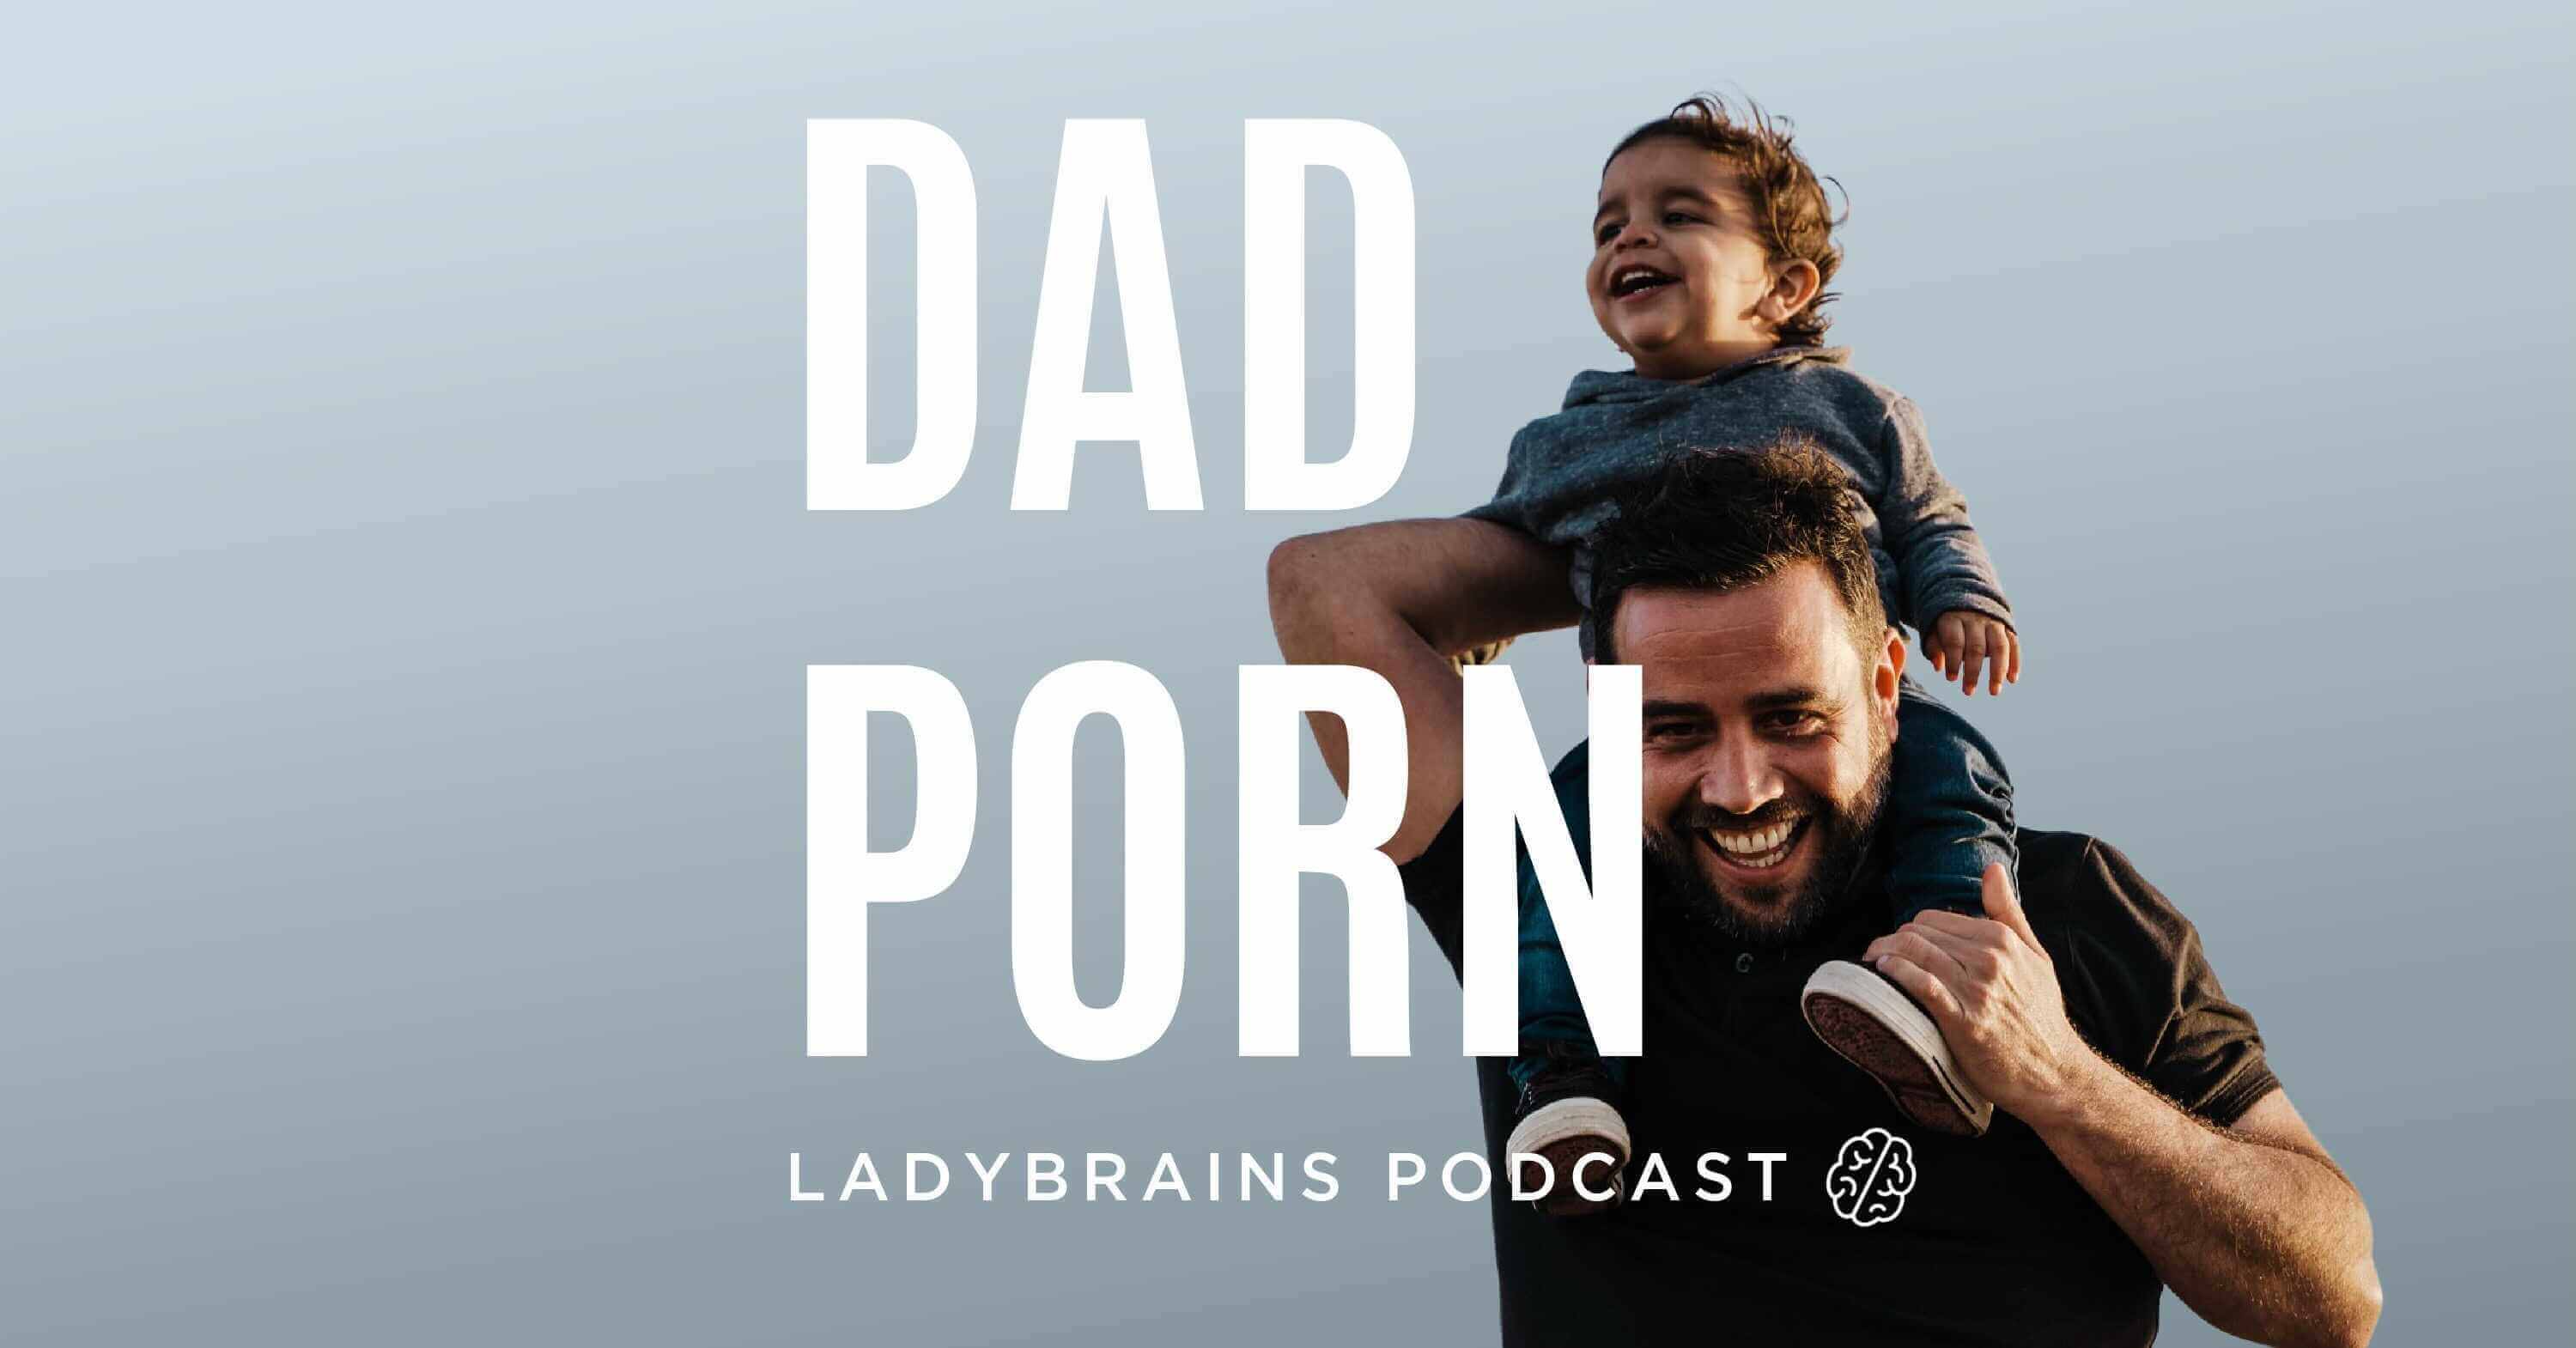 Dad Porn: It’s Not What You Think (and We Love It)